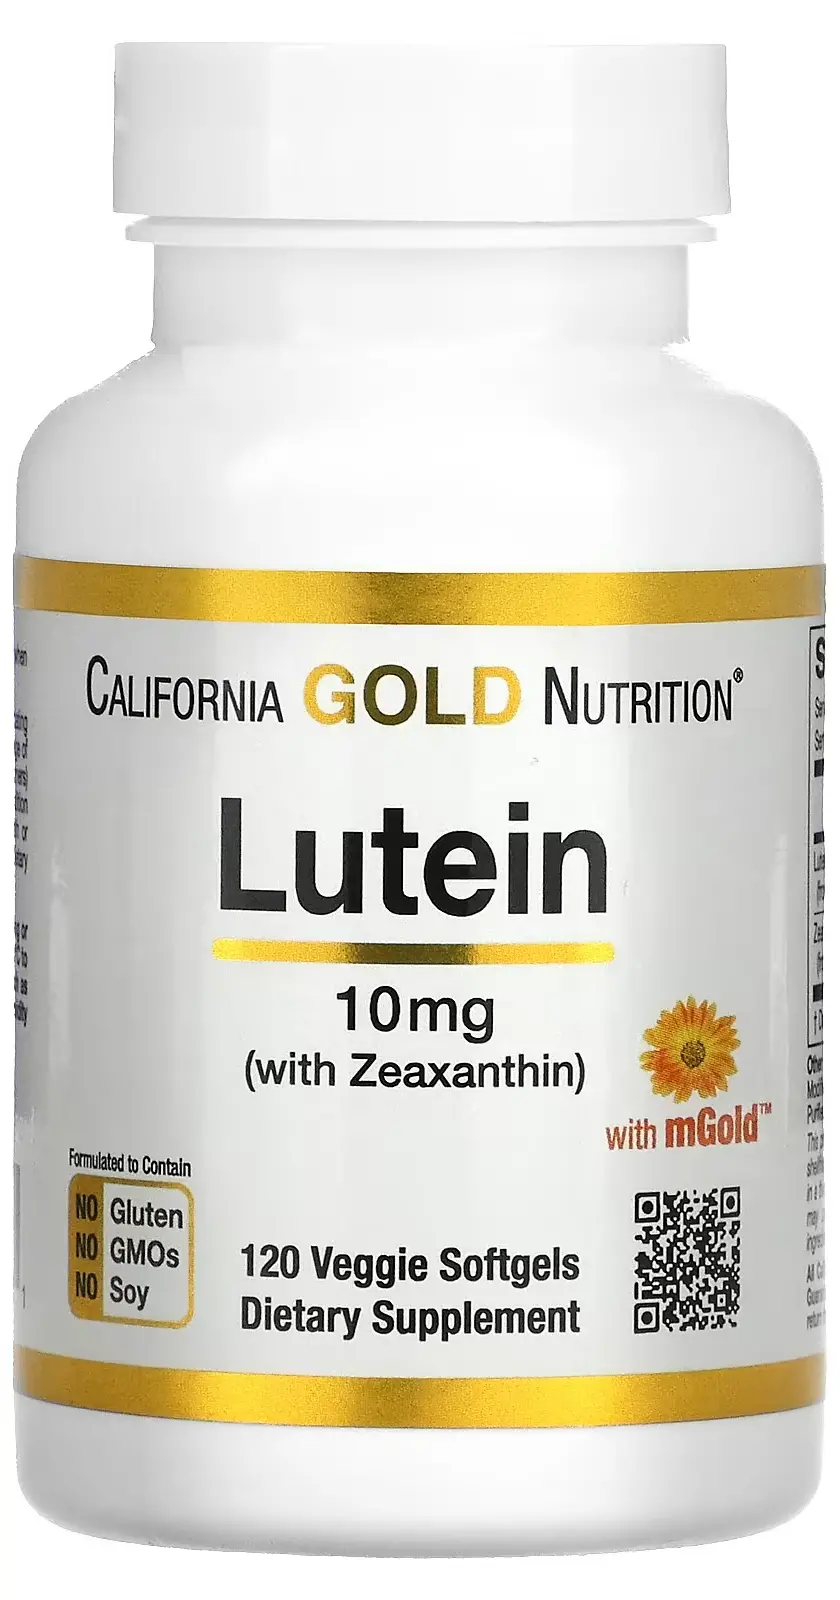 БАД California Gold Nutrition Lutein with Zeaxanthin, 10 мг, 120 вегетарианских капсул  (CGN-01168)